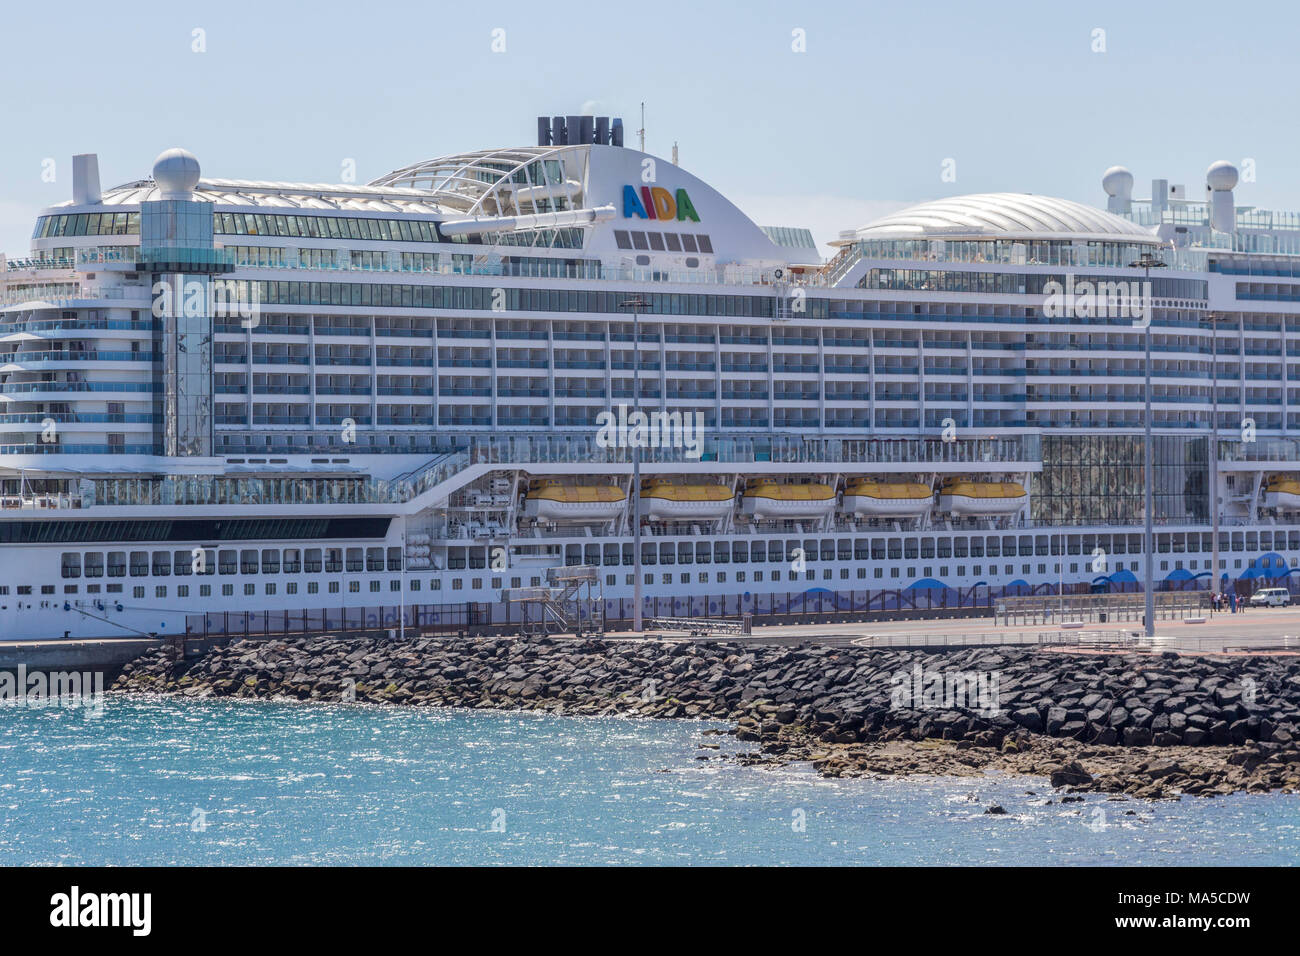 Cruise ship aida in Arrecife, Holiday resort canary island of Lanzarote, a spanish island, off the coast of north west africa 2018 Stock Photo